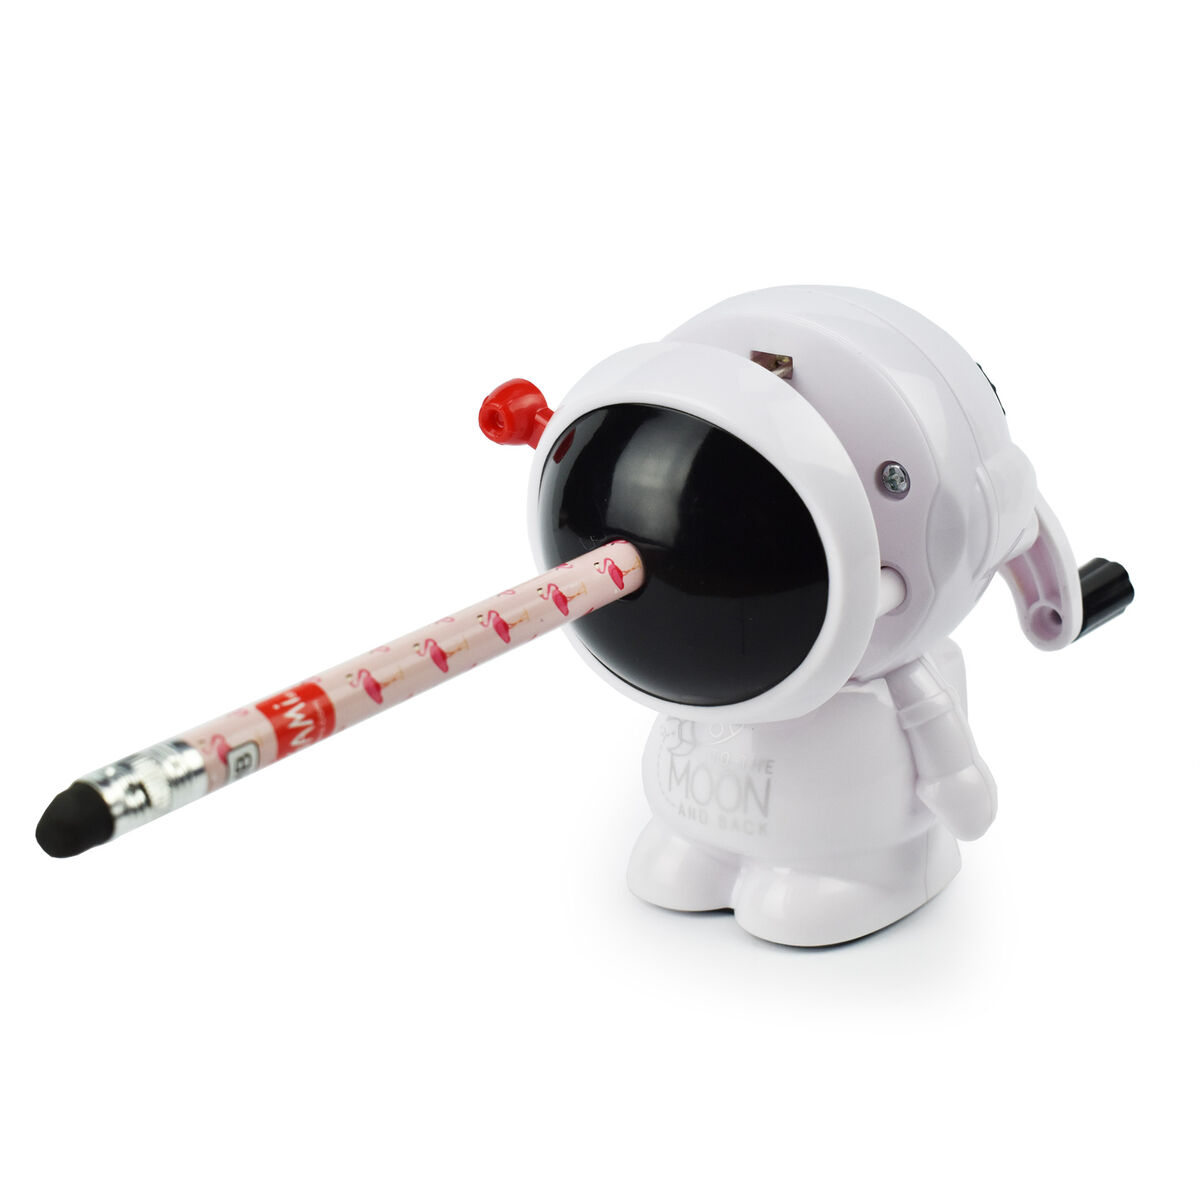 LEGAMI To The Moon and Back Bleistiftanspitzer 3 | Gift ideas for astronauts